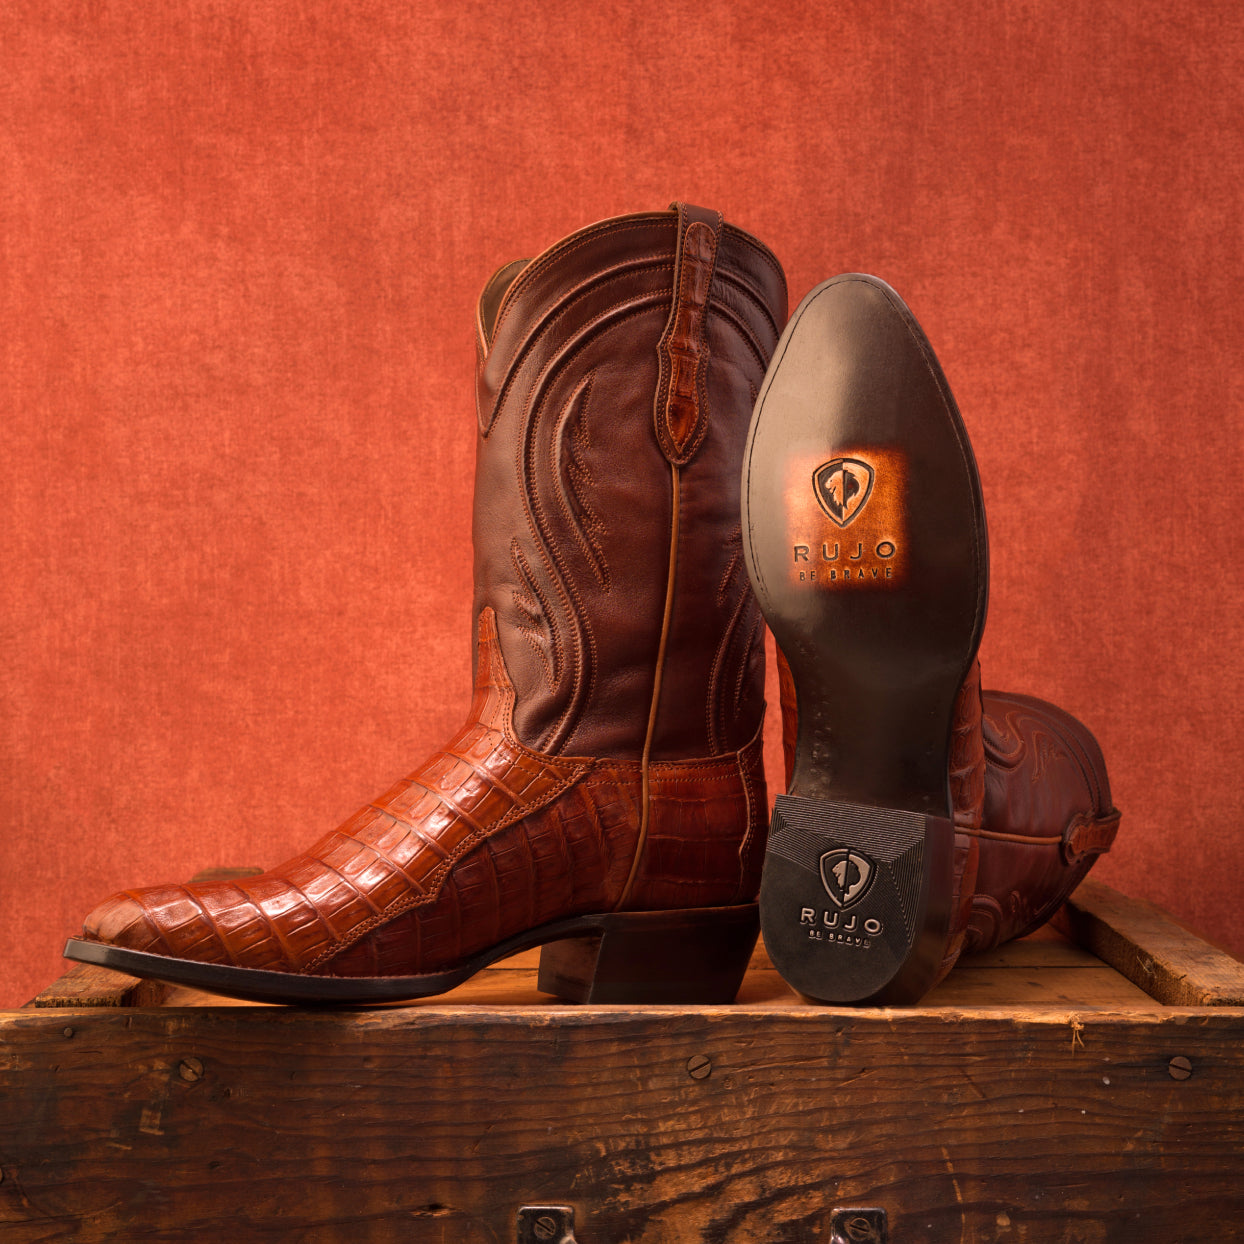 A propped up pair of RUJO caiman cowboy boots ready for a photo shoot